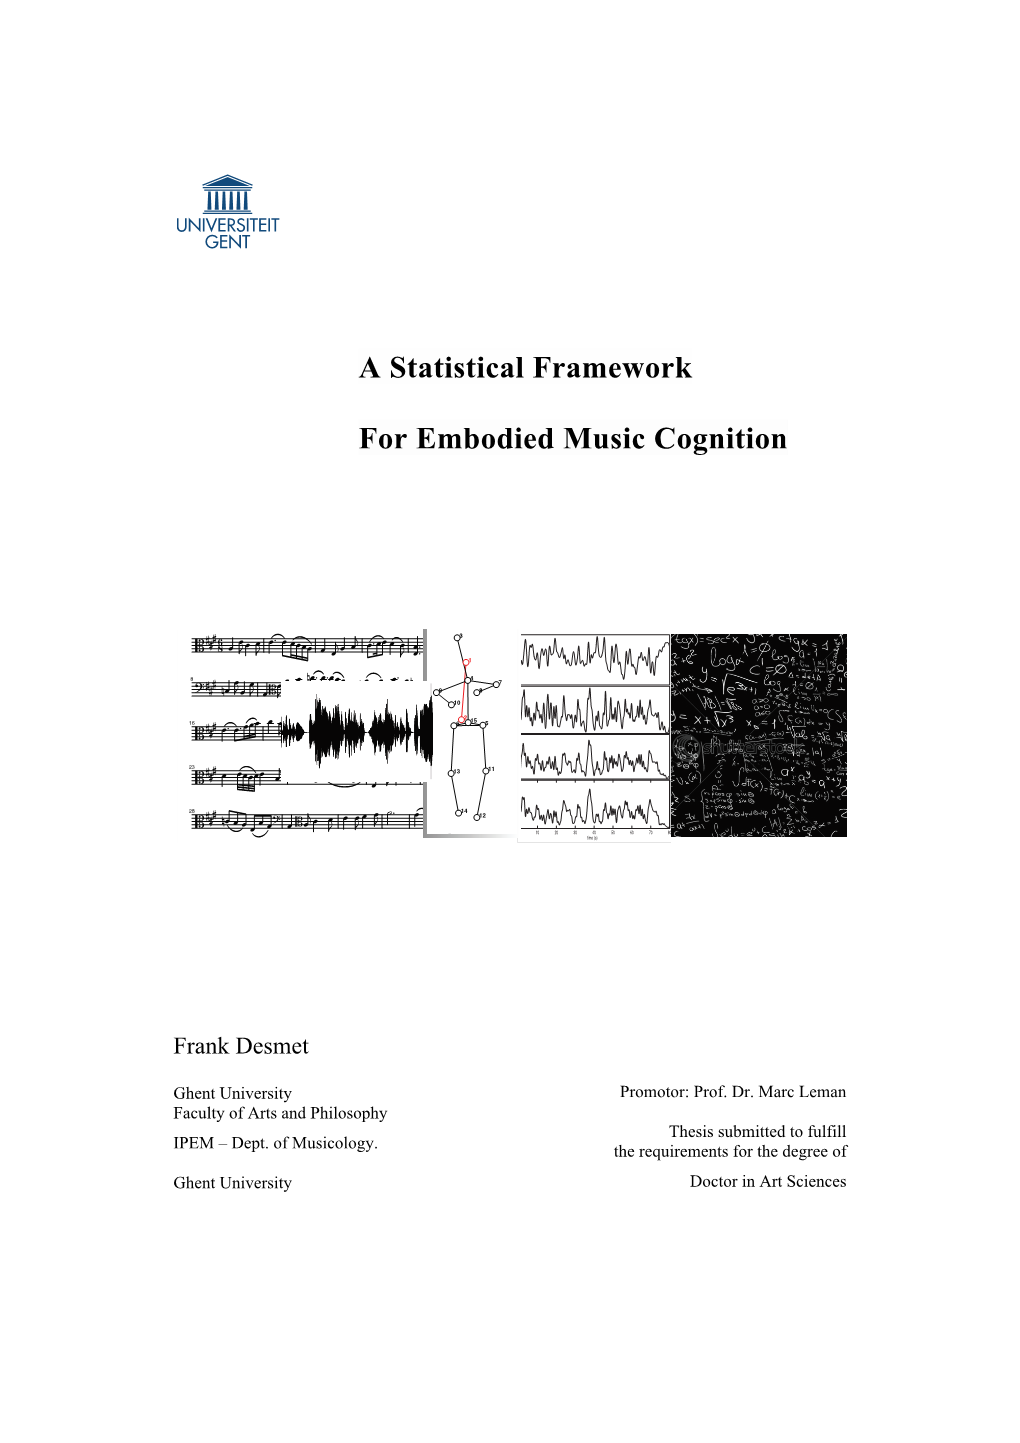 A Statistical Framework for Embodied Music Cognition